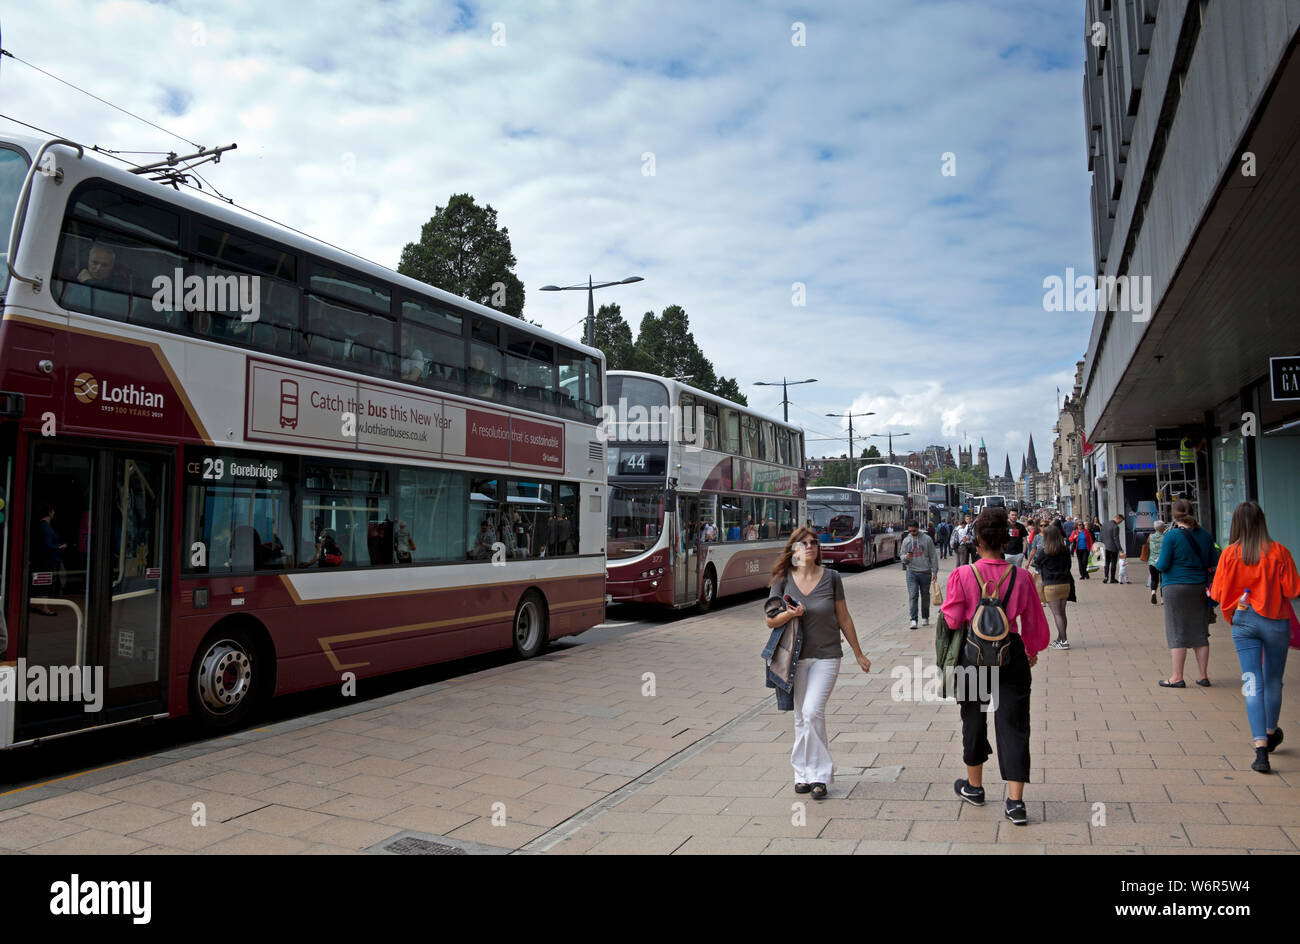 Princes Street, Edinburgh, Scotland. 2nd August 2019. First Day of Edinburgh Fringe Festival and the International Festival, and by the afternoon Princes Street had ground to a halt with buses nose to tail the whole length of the city centre main artery blocking junctions and forcing drivers to allow passengers to alight in between stops due to the massive delay. Stock Photo